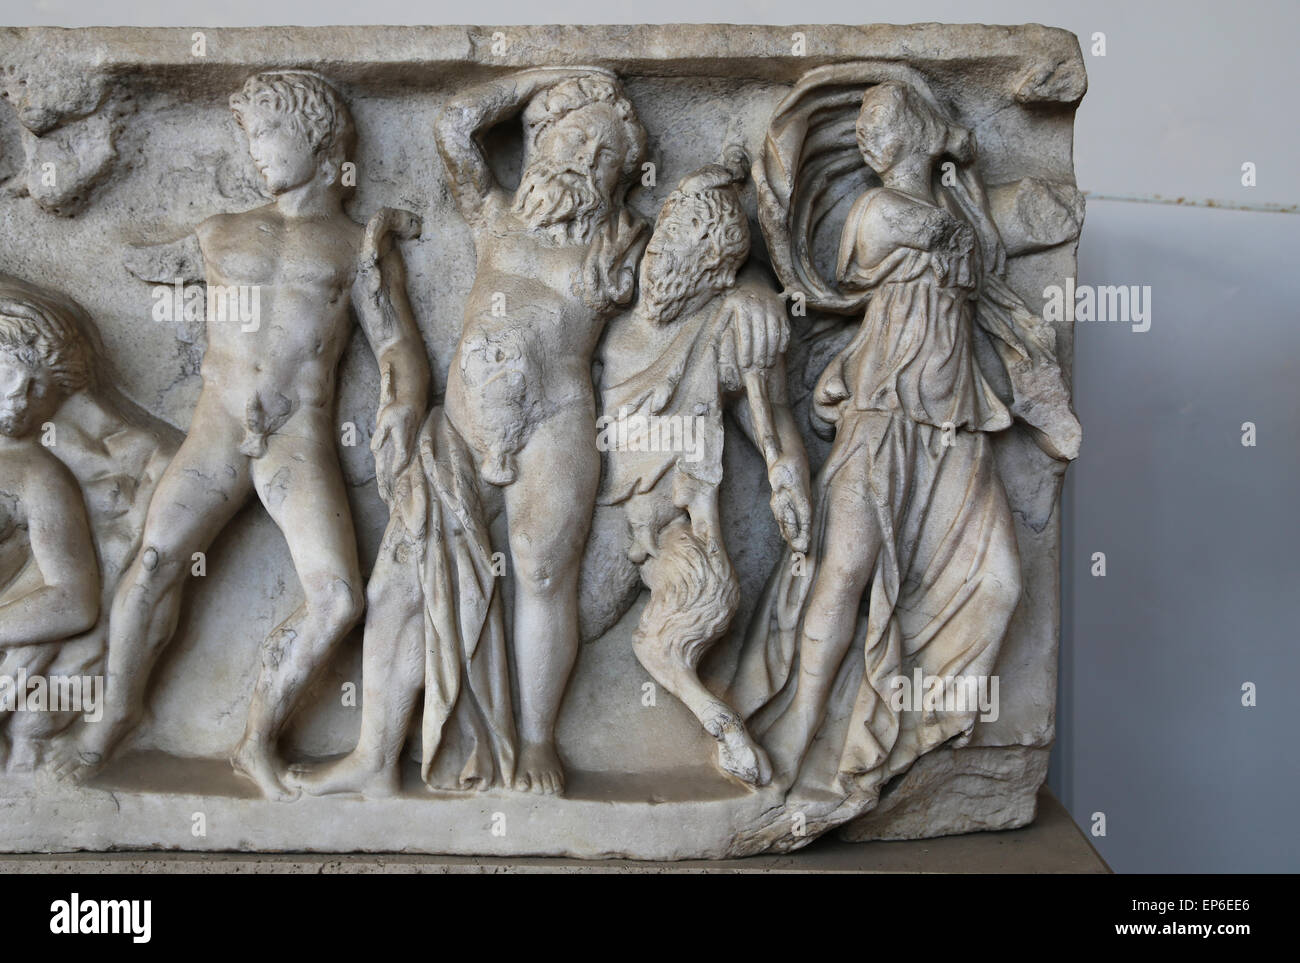 Sarcophagus. Dionysiac scenes. Marble. 160-180 Ad. Rome. Via Appia. National Roman Museum. Baths of Diocletian. Rome. Italy. Stock Photo